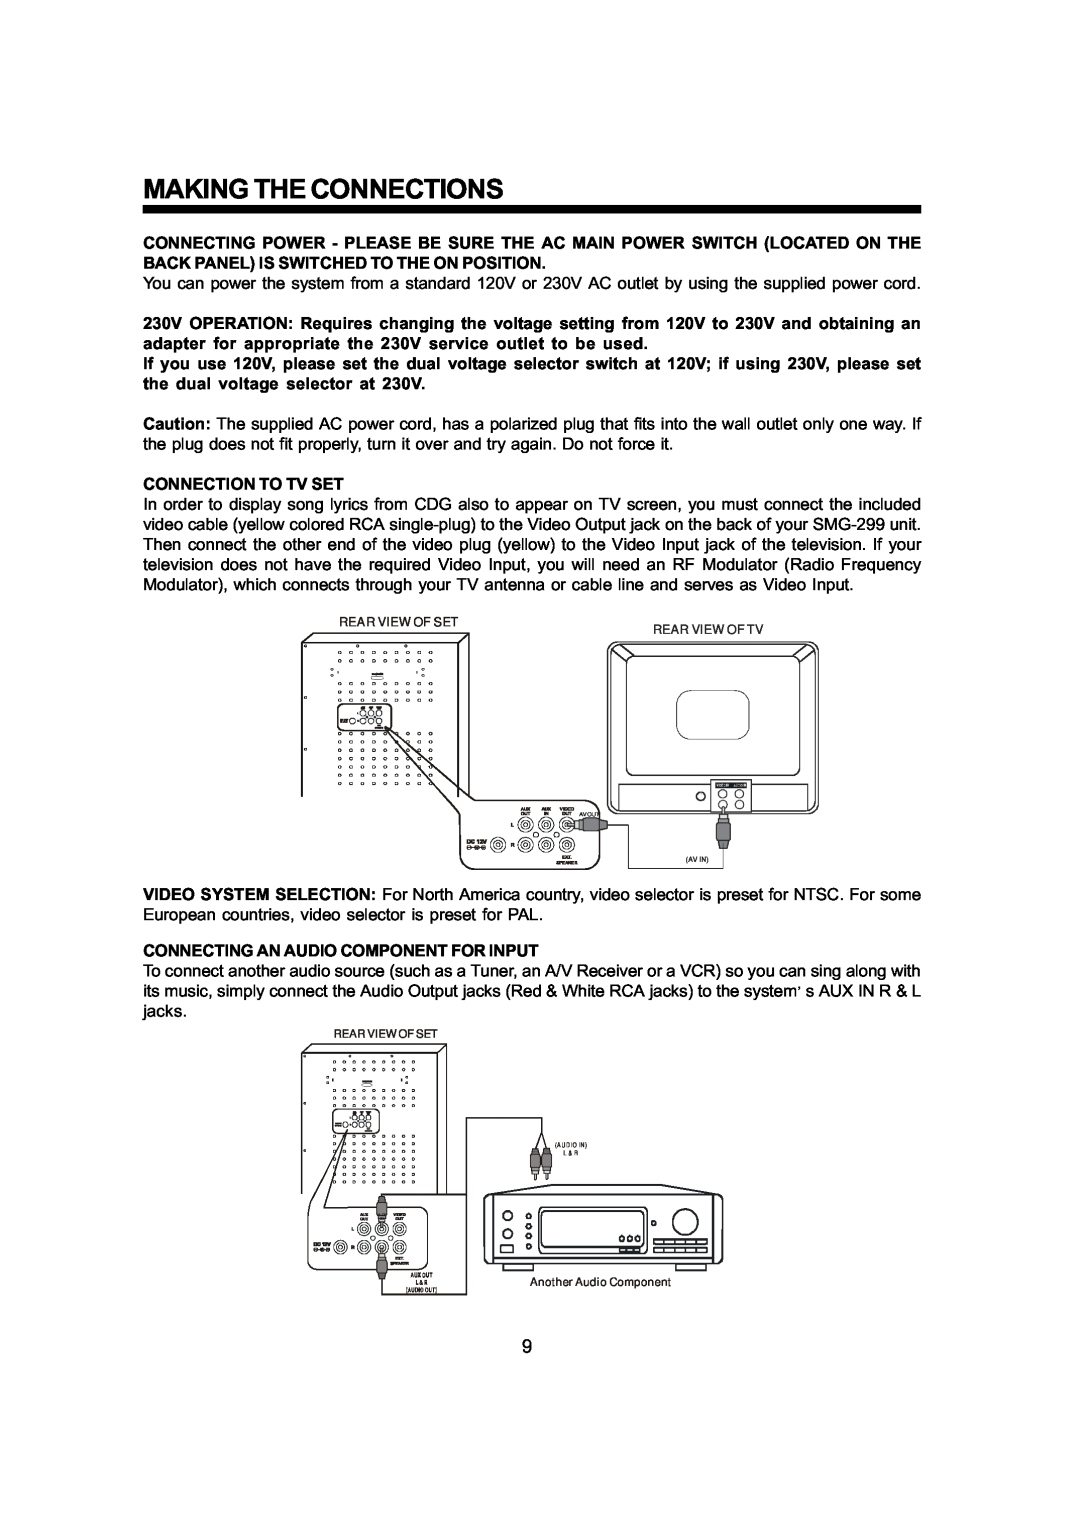 The Singing Machine SMG - 299 owner manual Making The Connections 